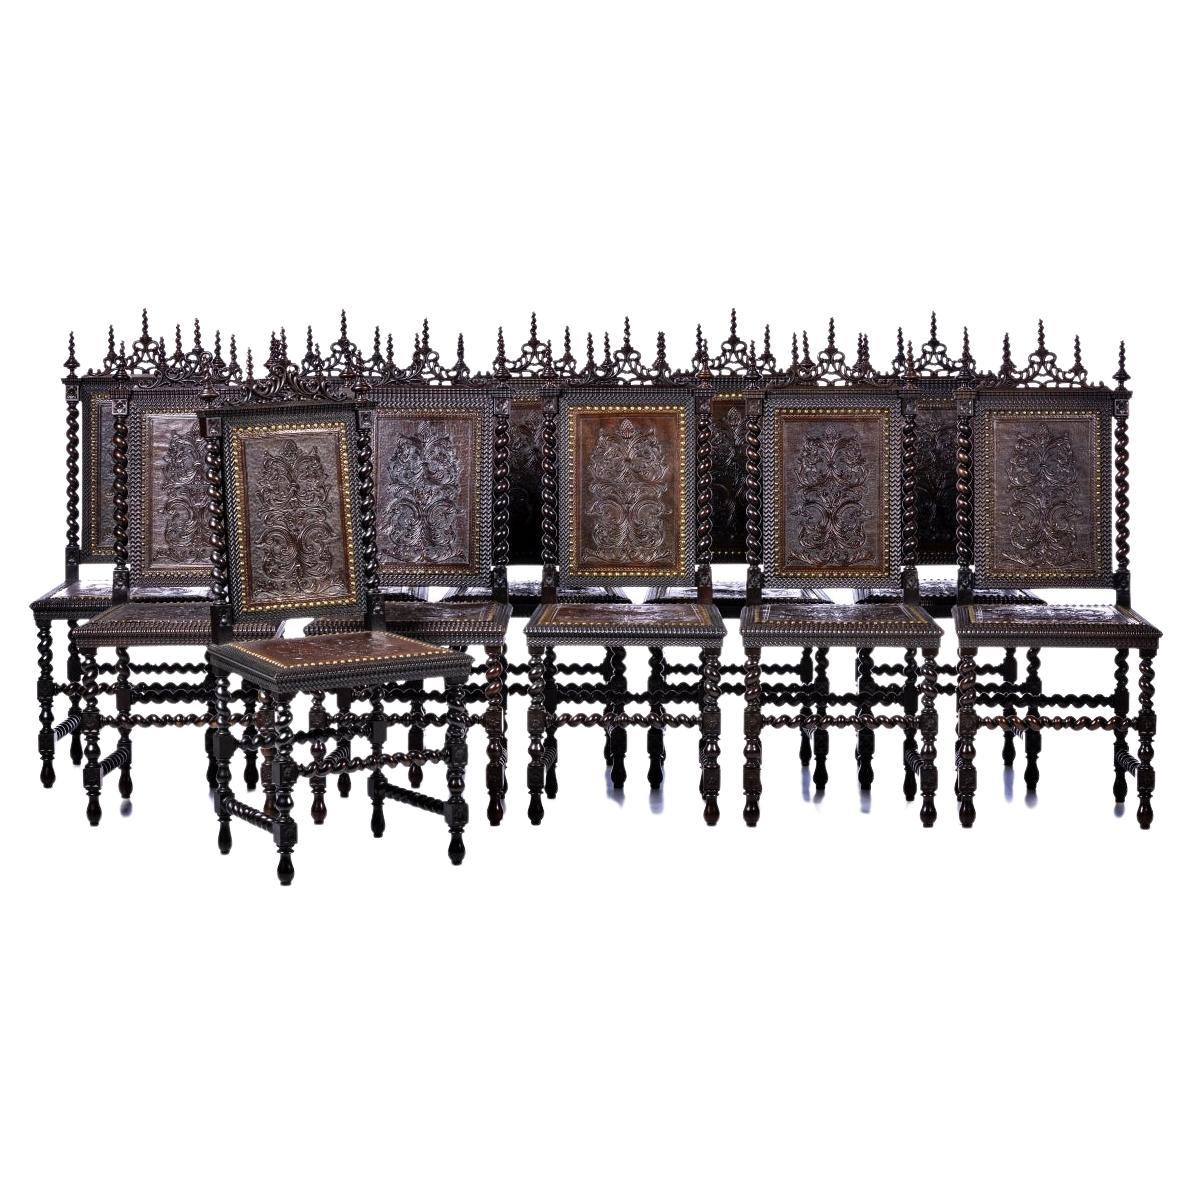 SET OF TWELVE PORTUGUESE CHAIRS  19th Century in carved Rosewood Wood